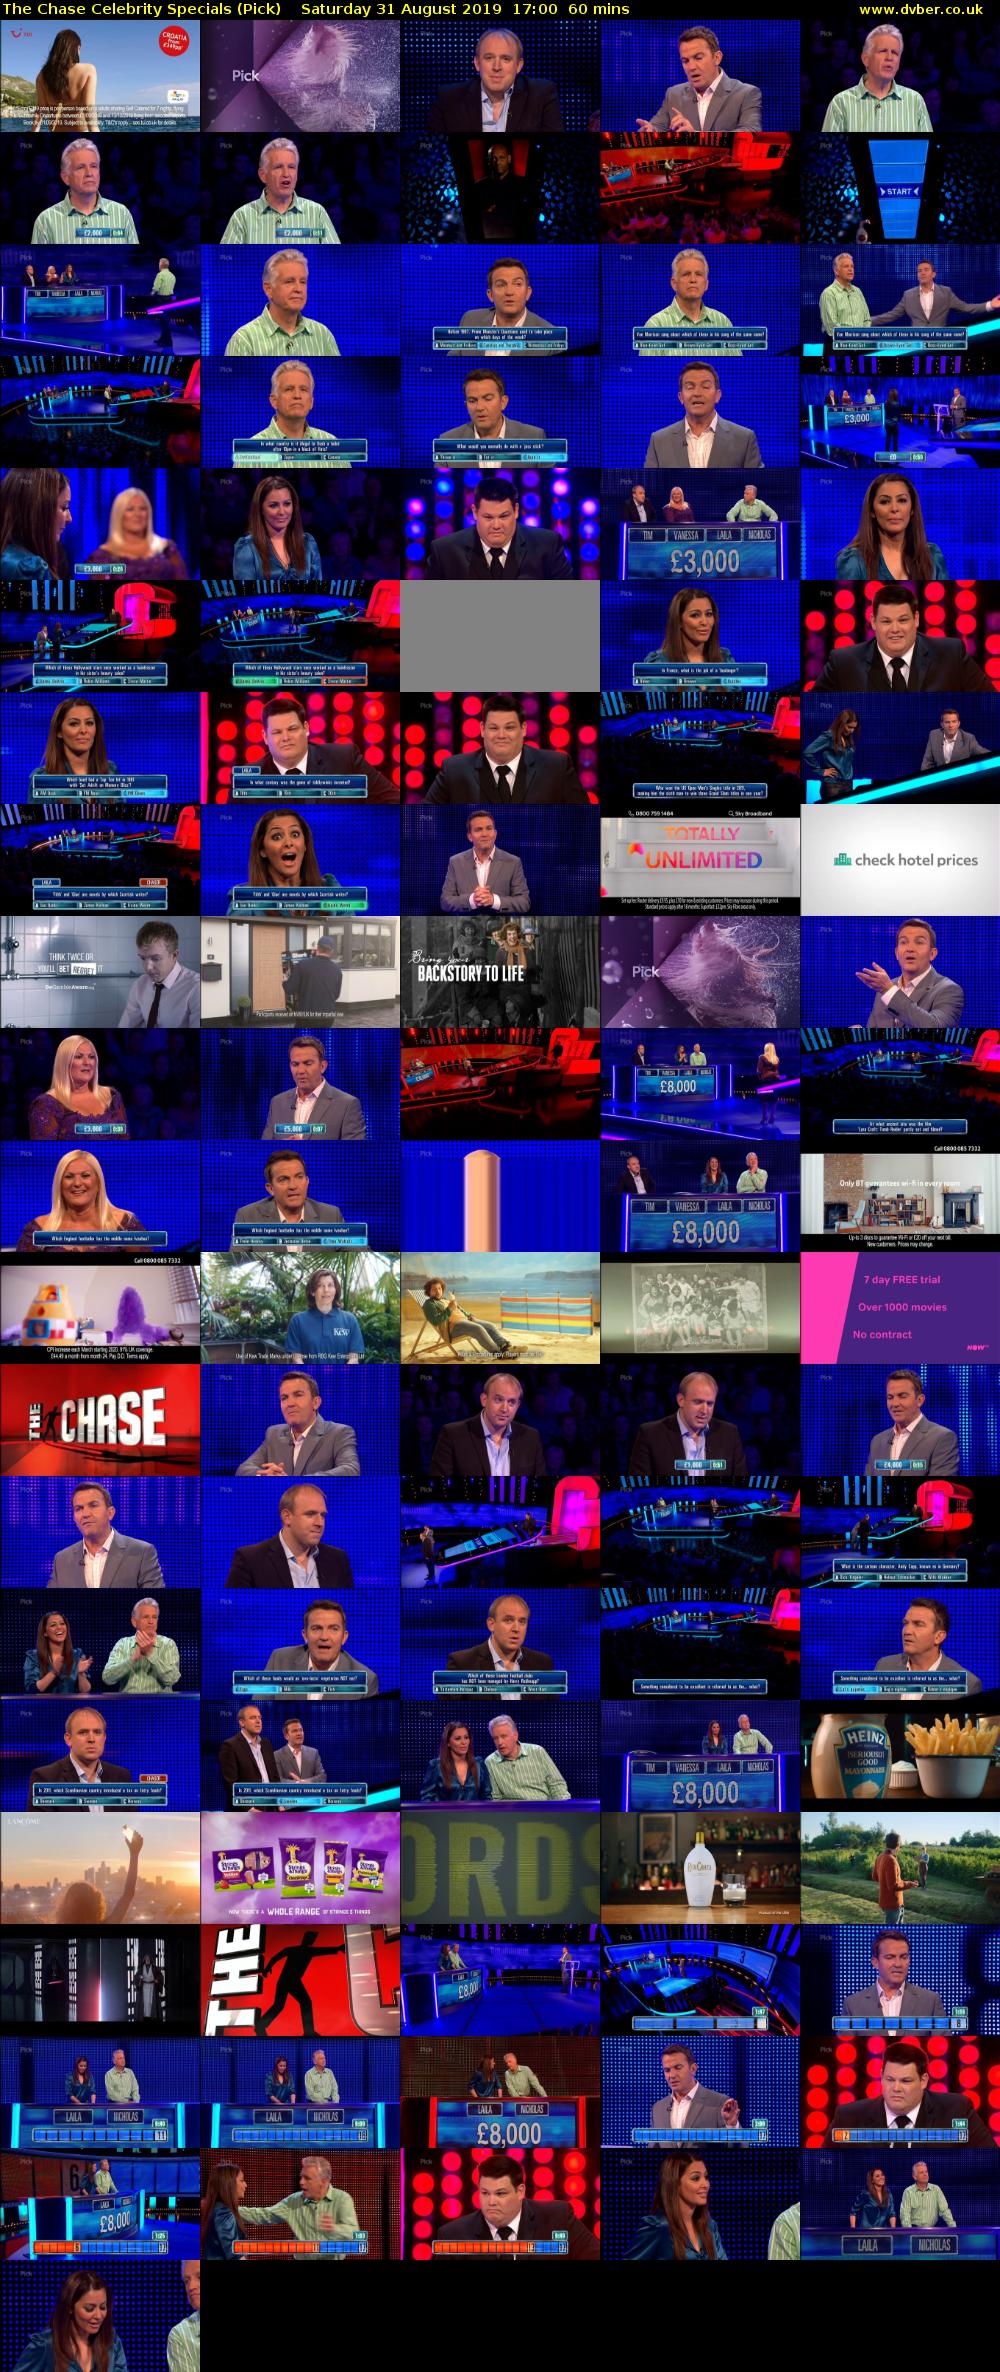 The Chase Celebrity Specials (Pick) Saturday 31 August 2019 17:00 - 18:00